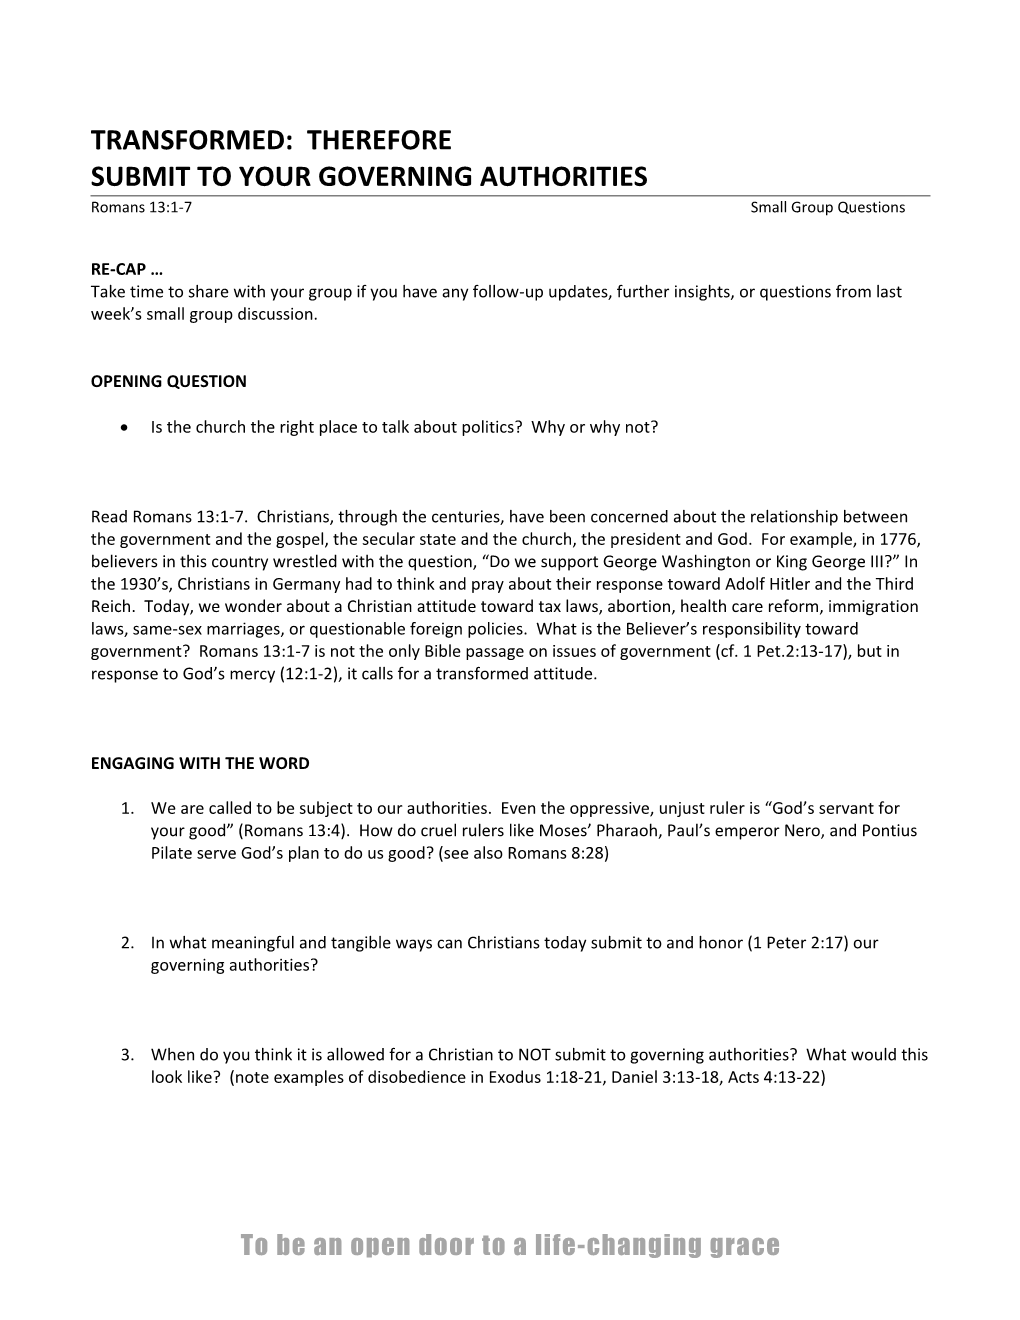 Submit to Your Governing Authorities